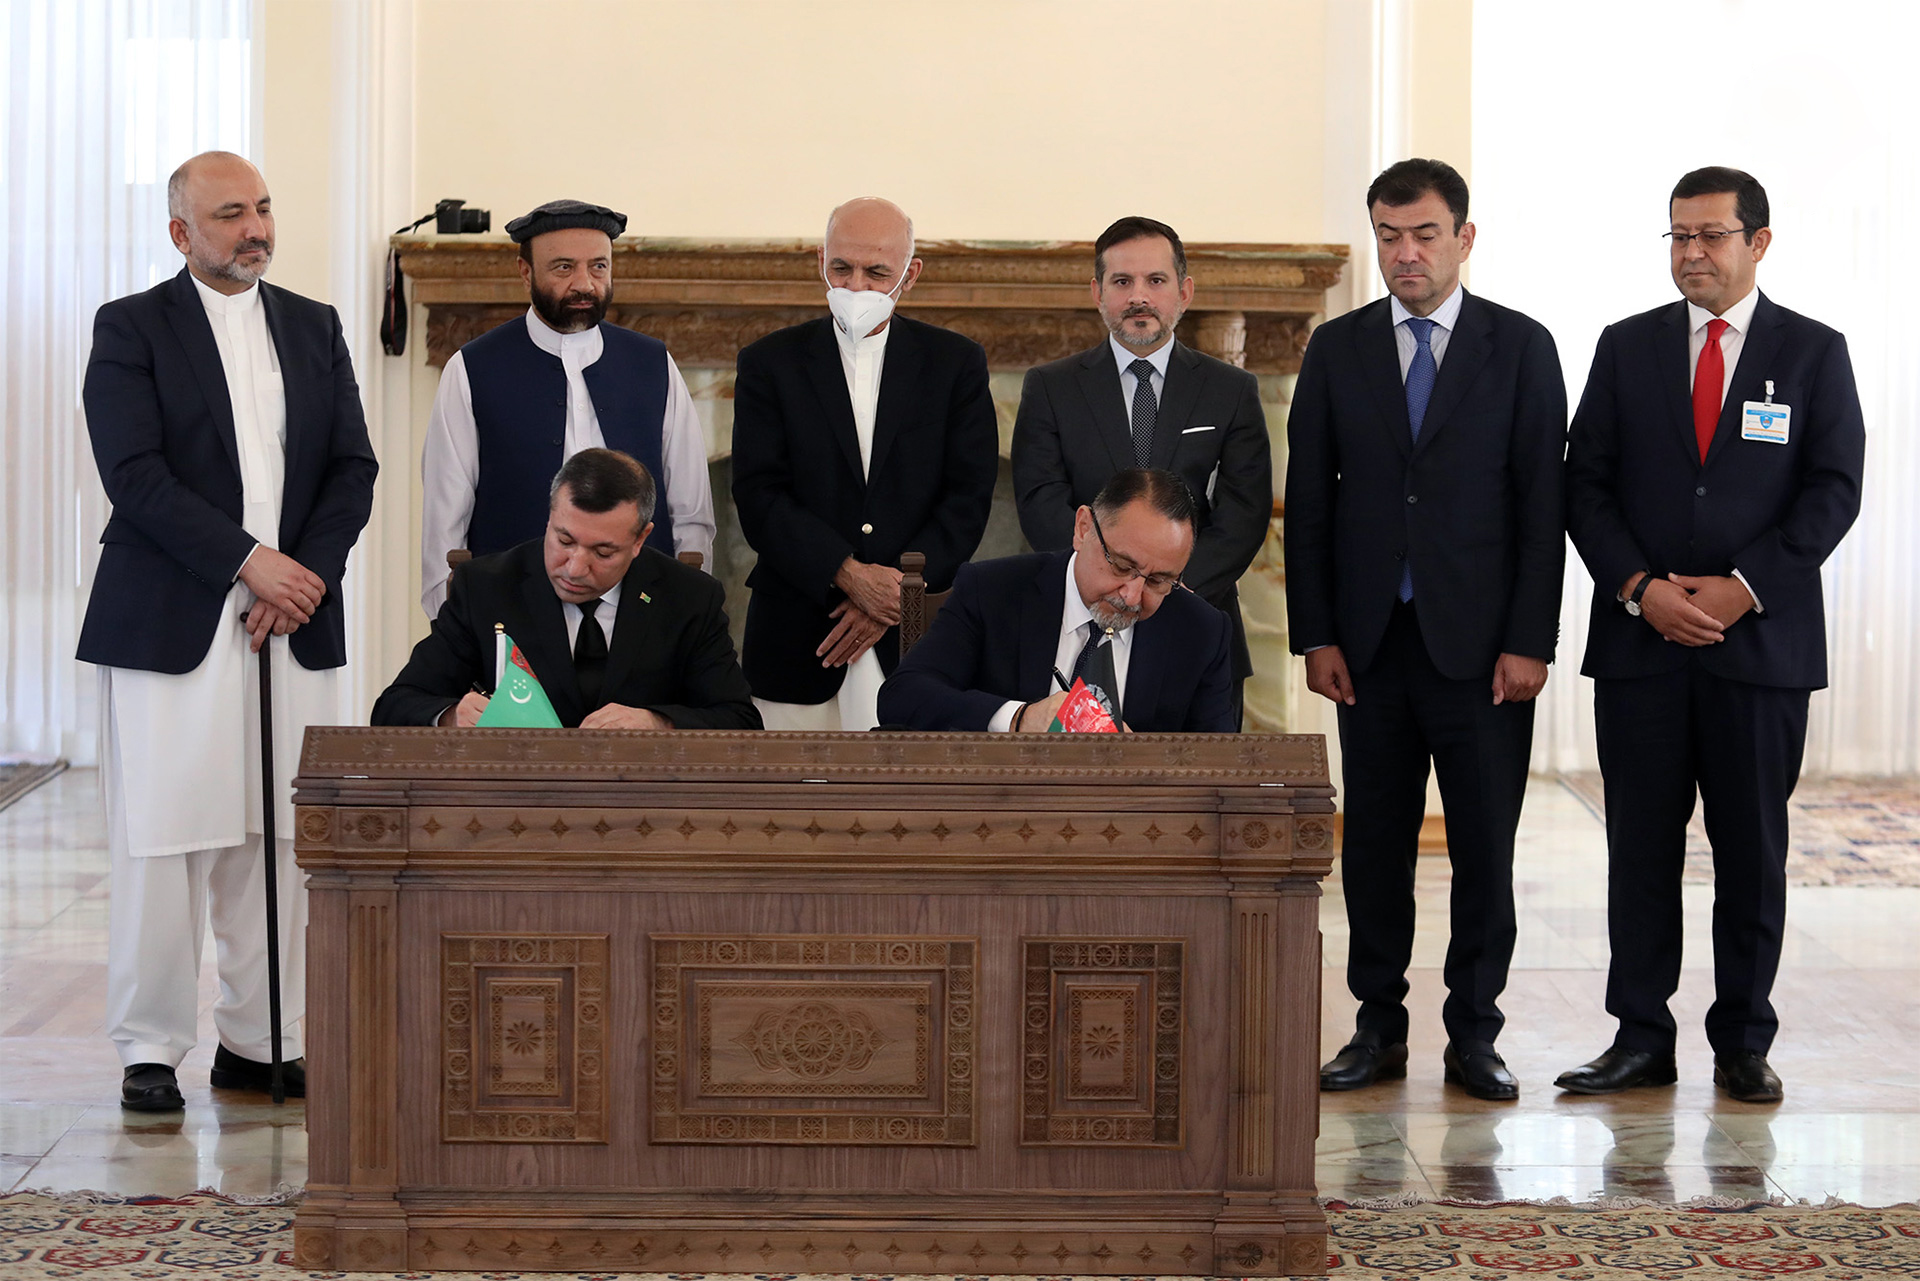 BAYAT ENERGY SIGNS DEAL TO IMPORT POWER, CONNECT FIBER OPTICS FOR AFGHAN GOVERNMENT